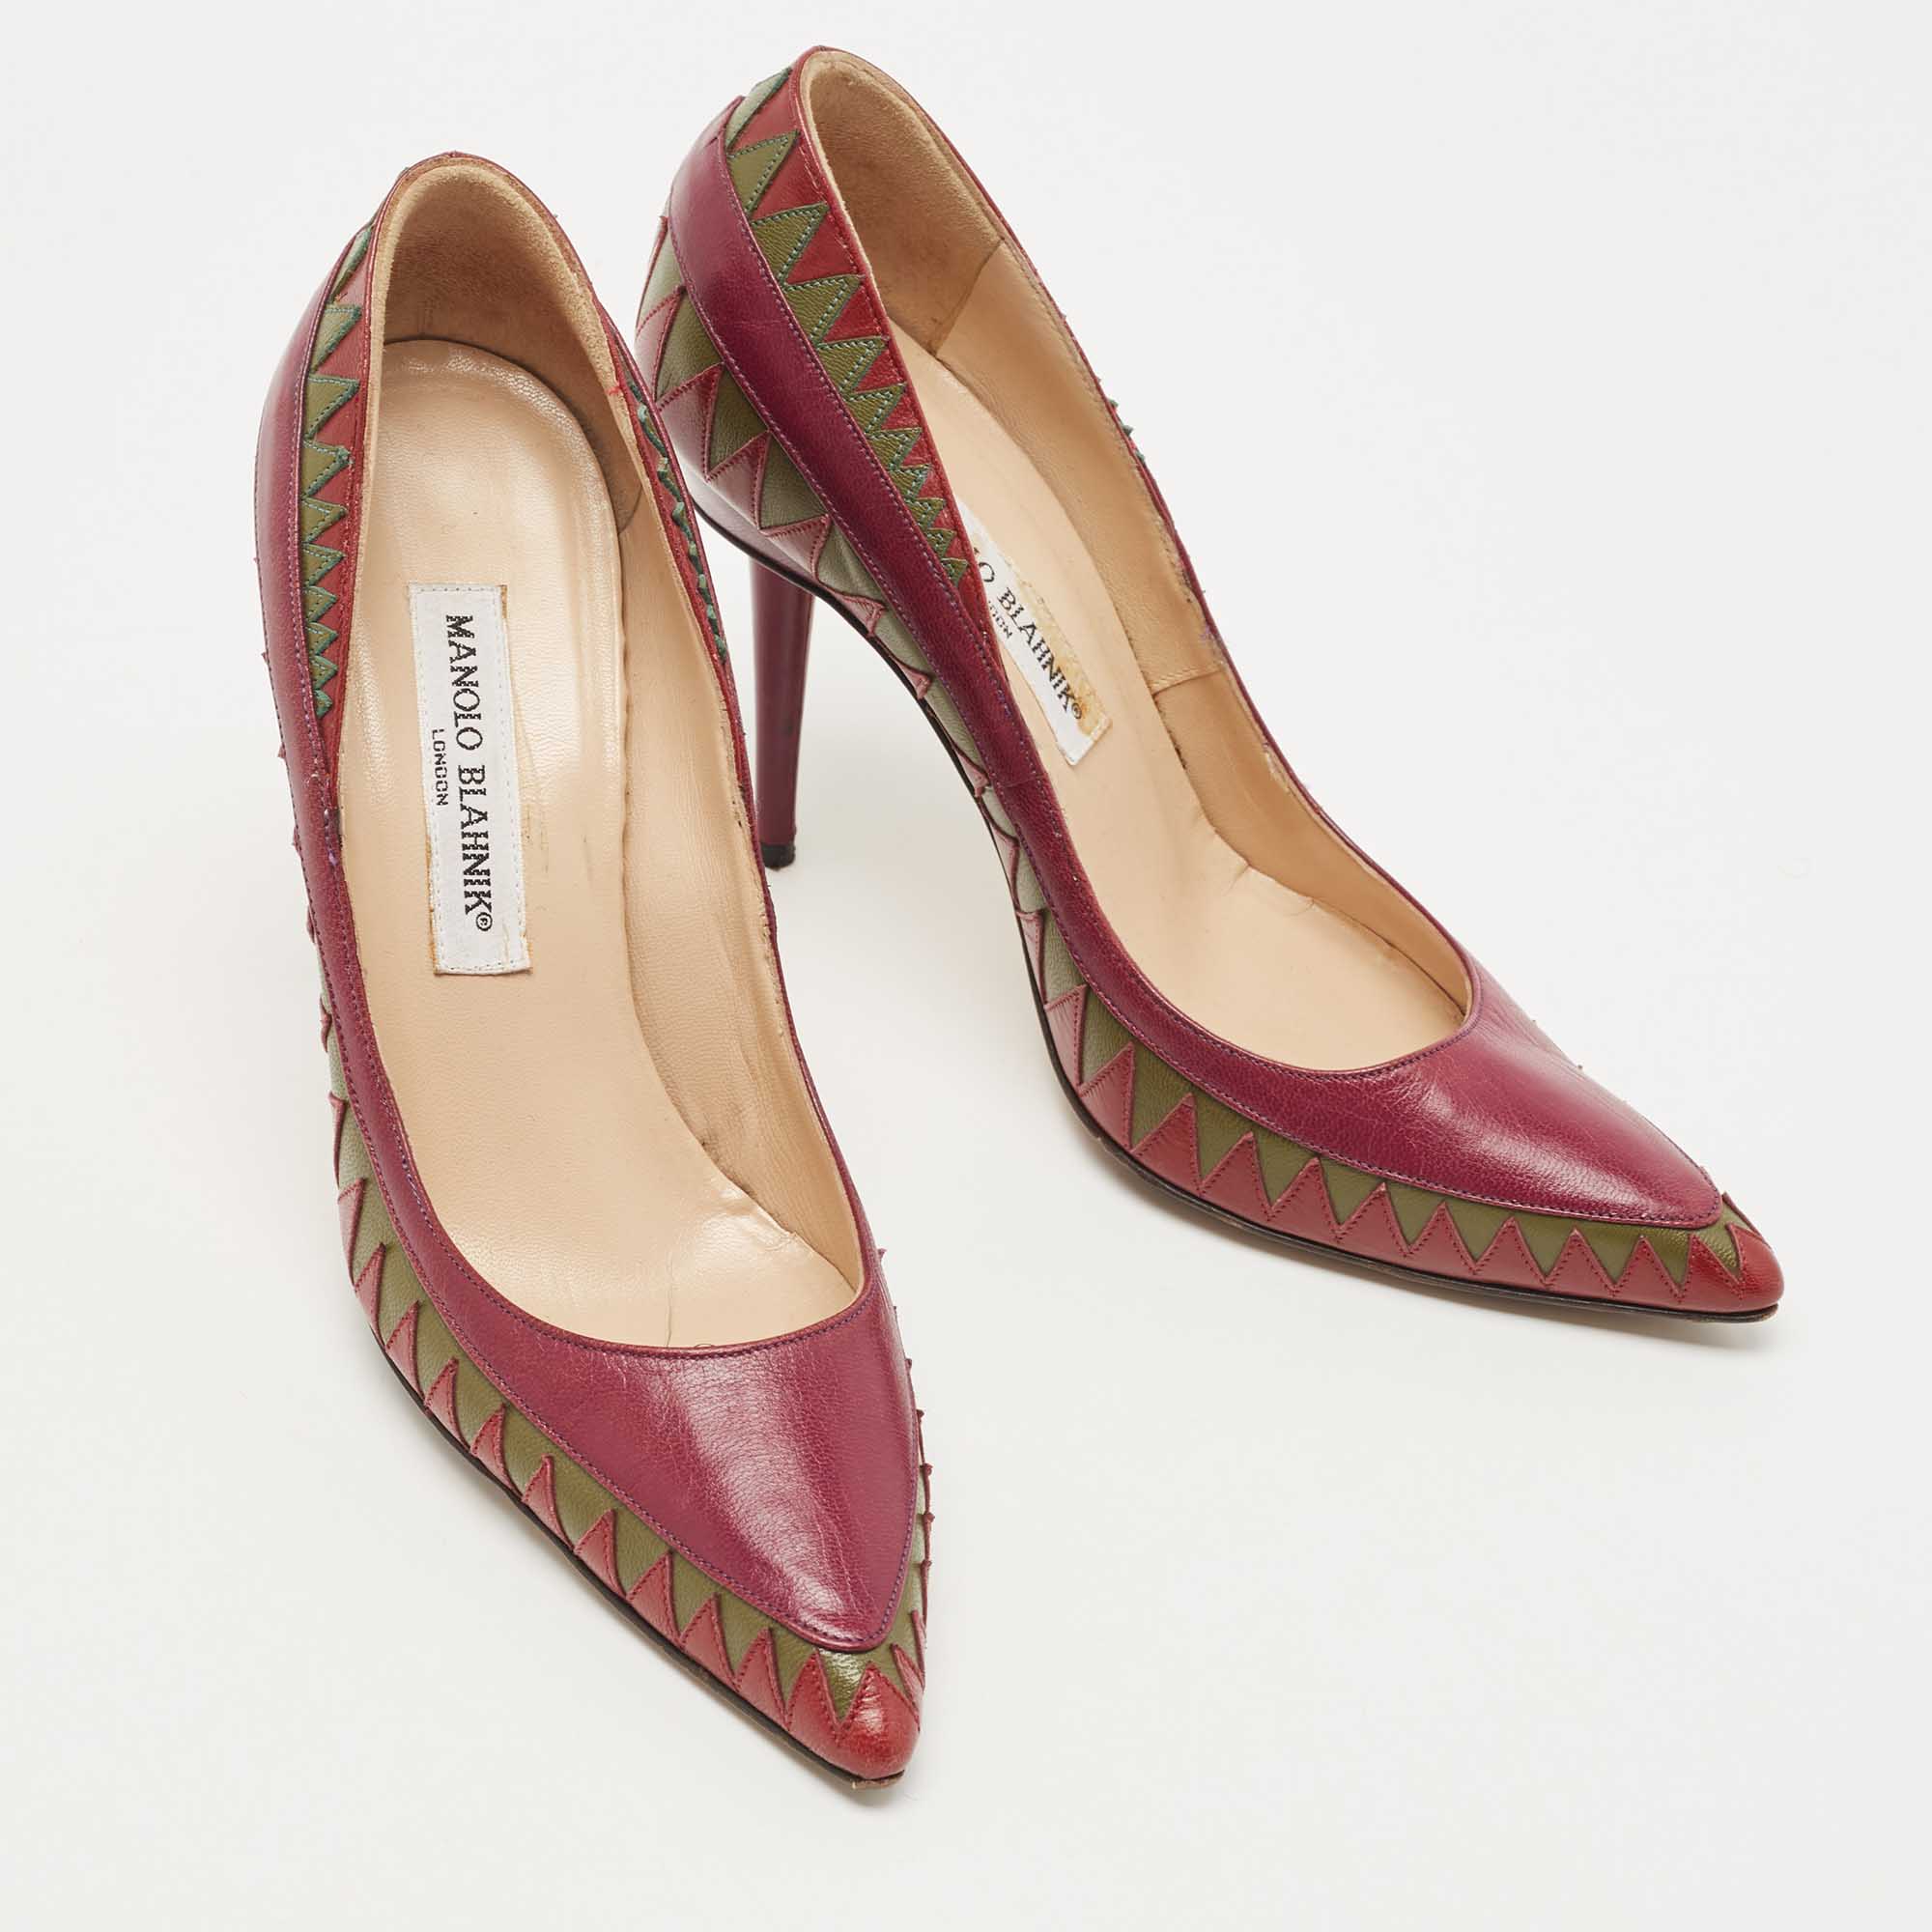 Manolo Blahnik Tricolor Leather Pointed Toe Pumps Size 37.5